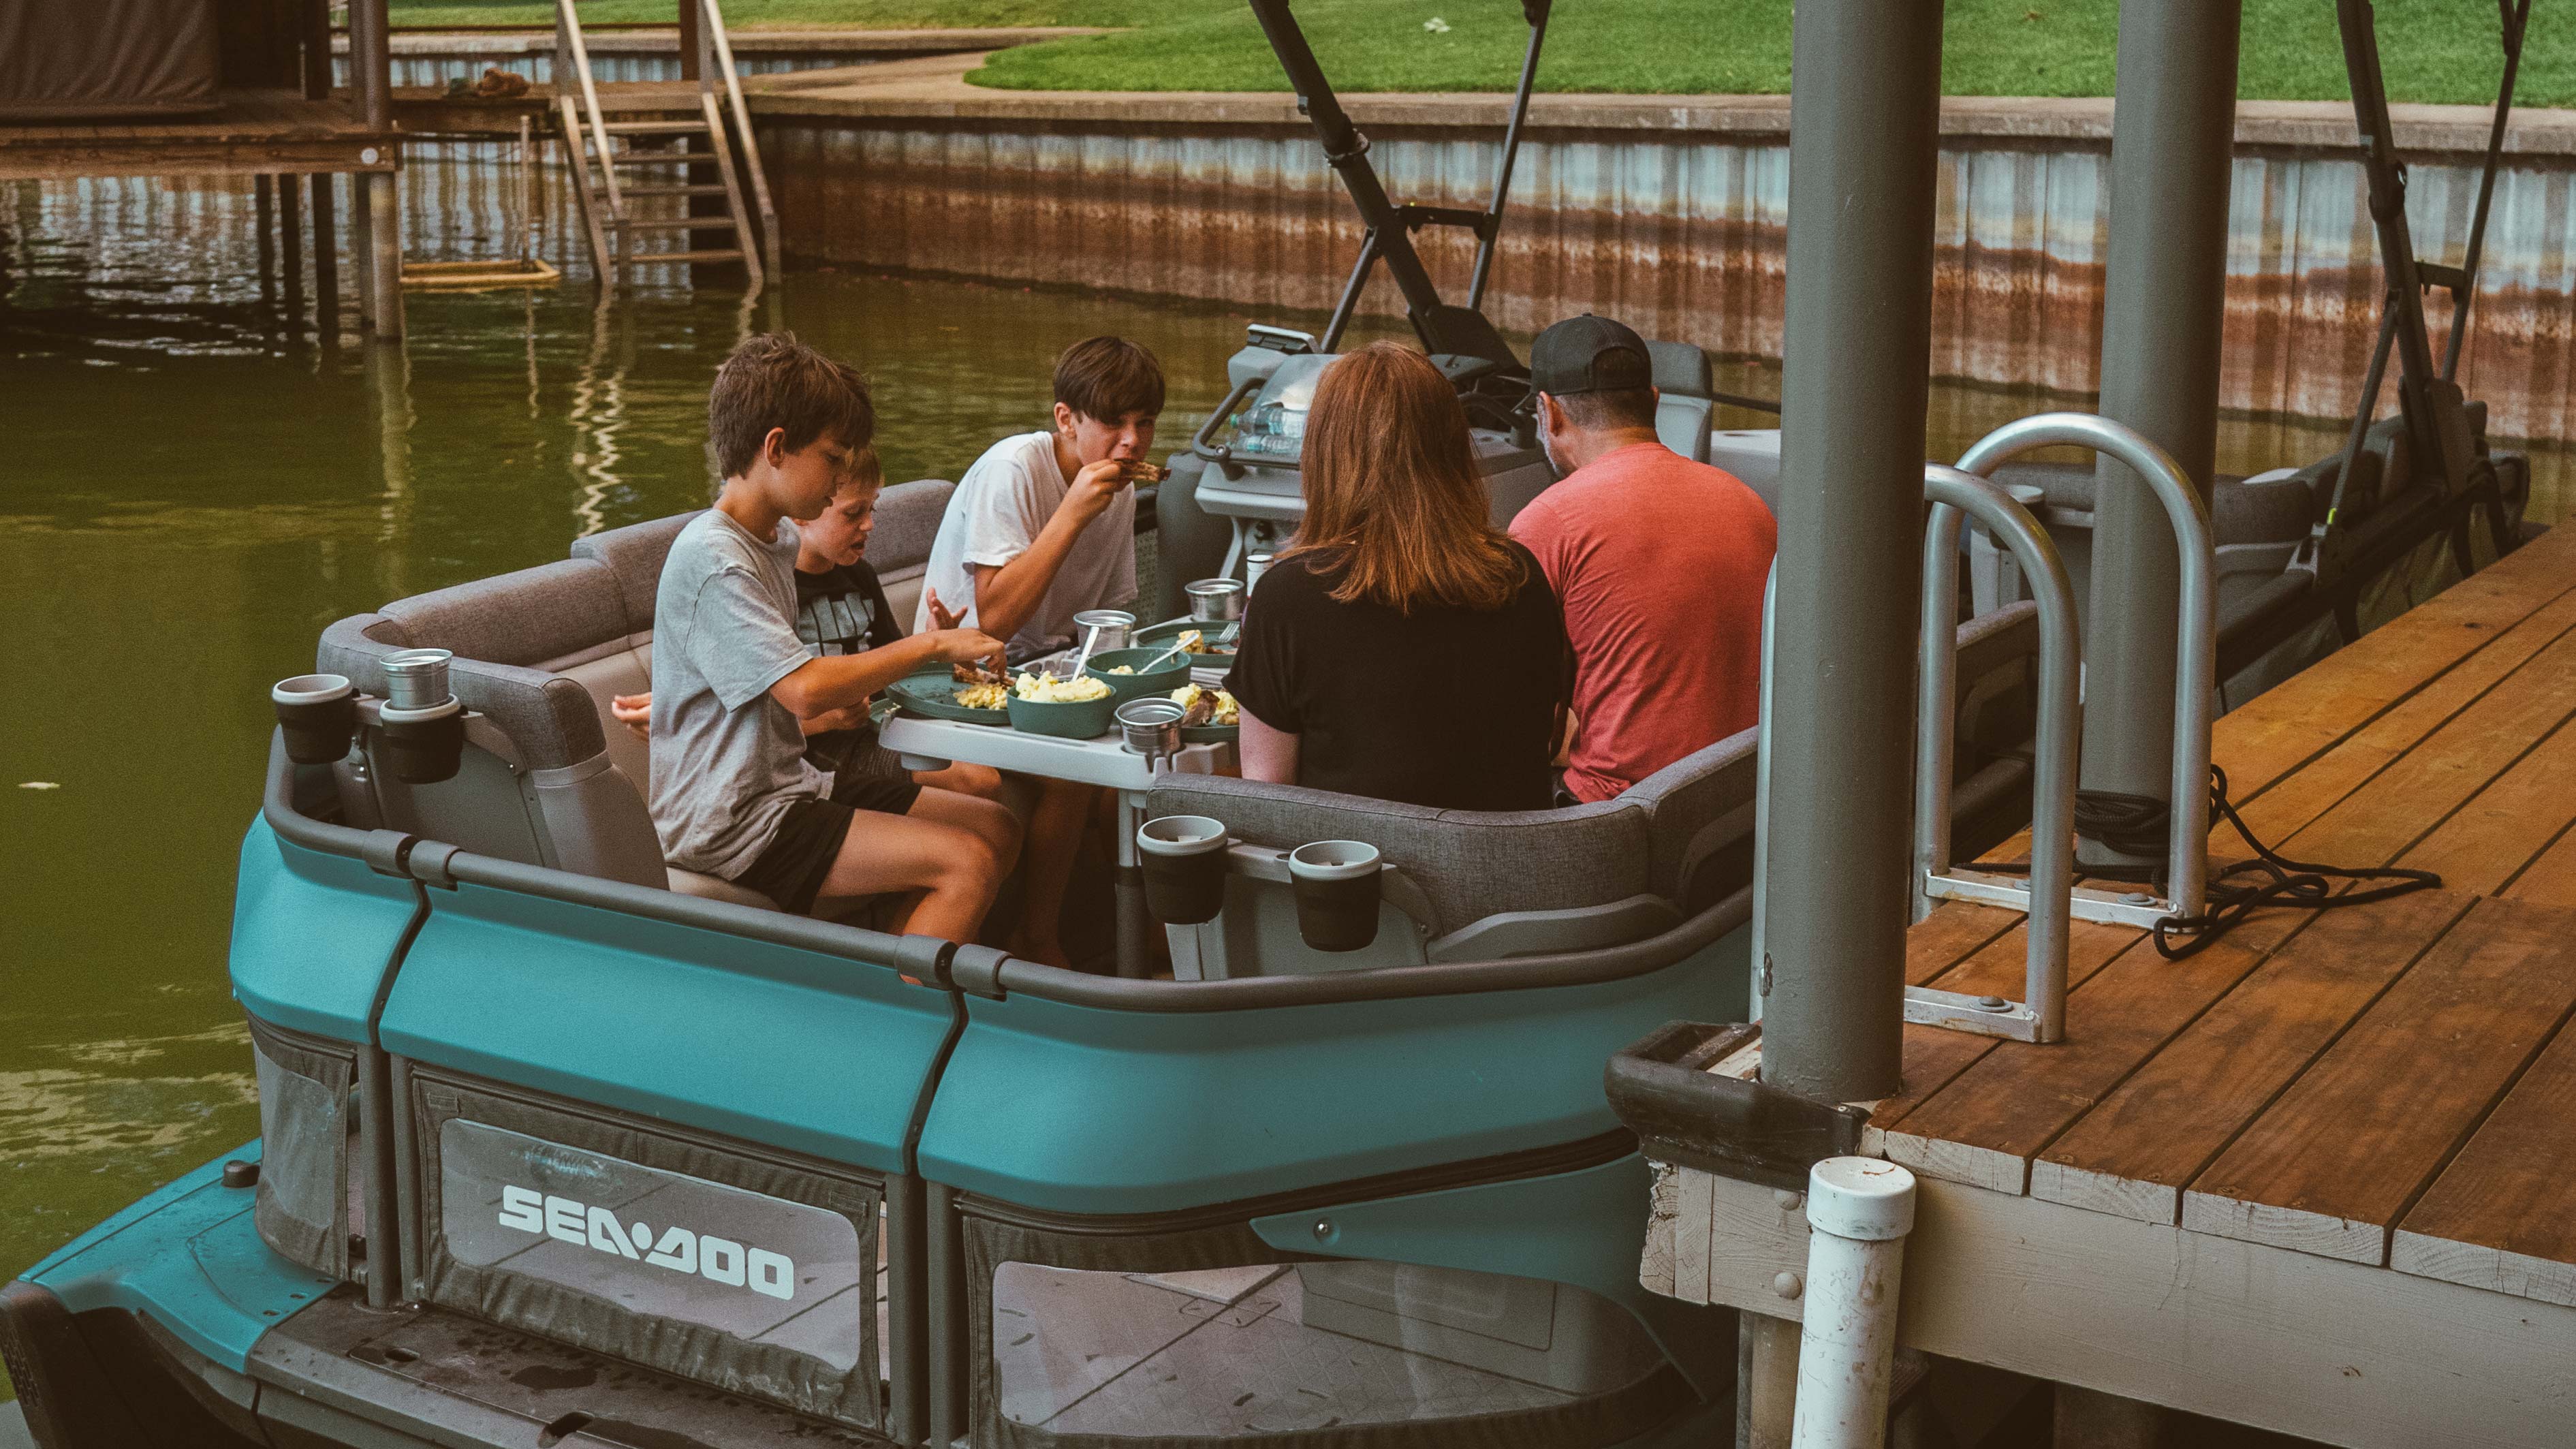 The Evans family enjoying a meal on the Sea-Doo SWITCH